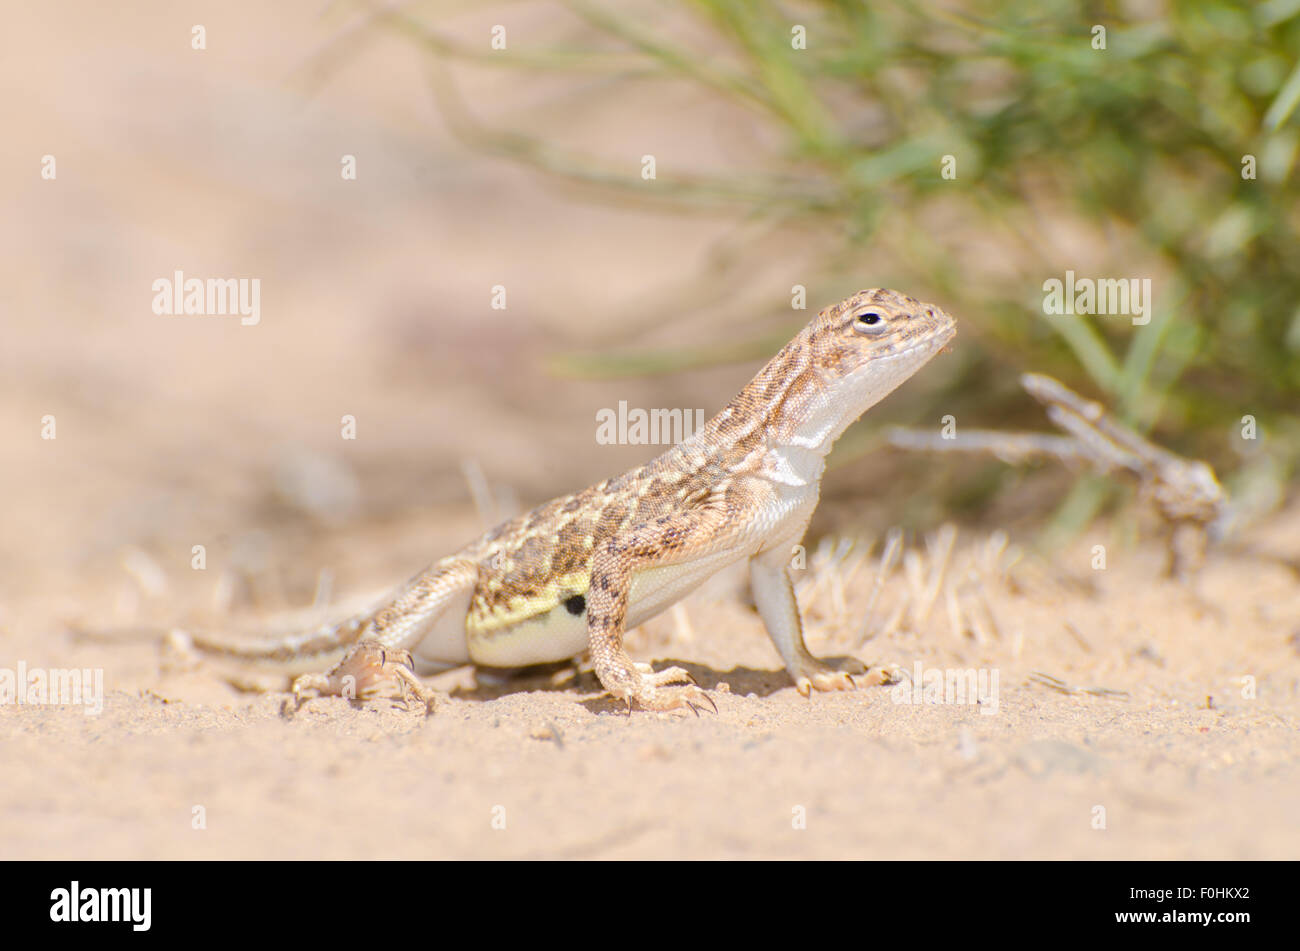 Speckled Earless Lizard, (Holbrookia maculata approximans), Volcanoes Day Use Area, Petroglyph National Monument, New Mexico. Stock Photo